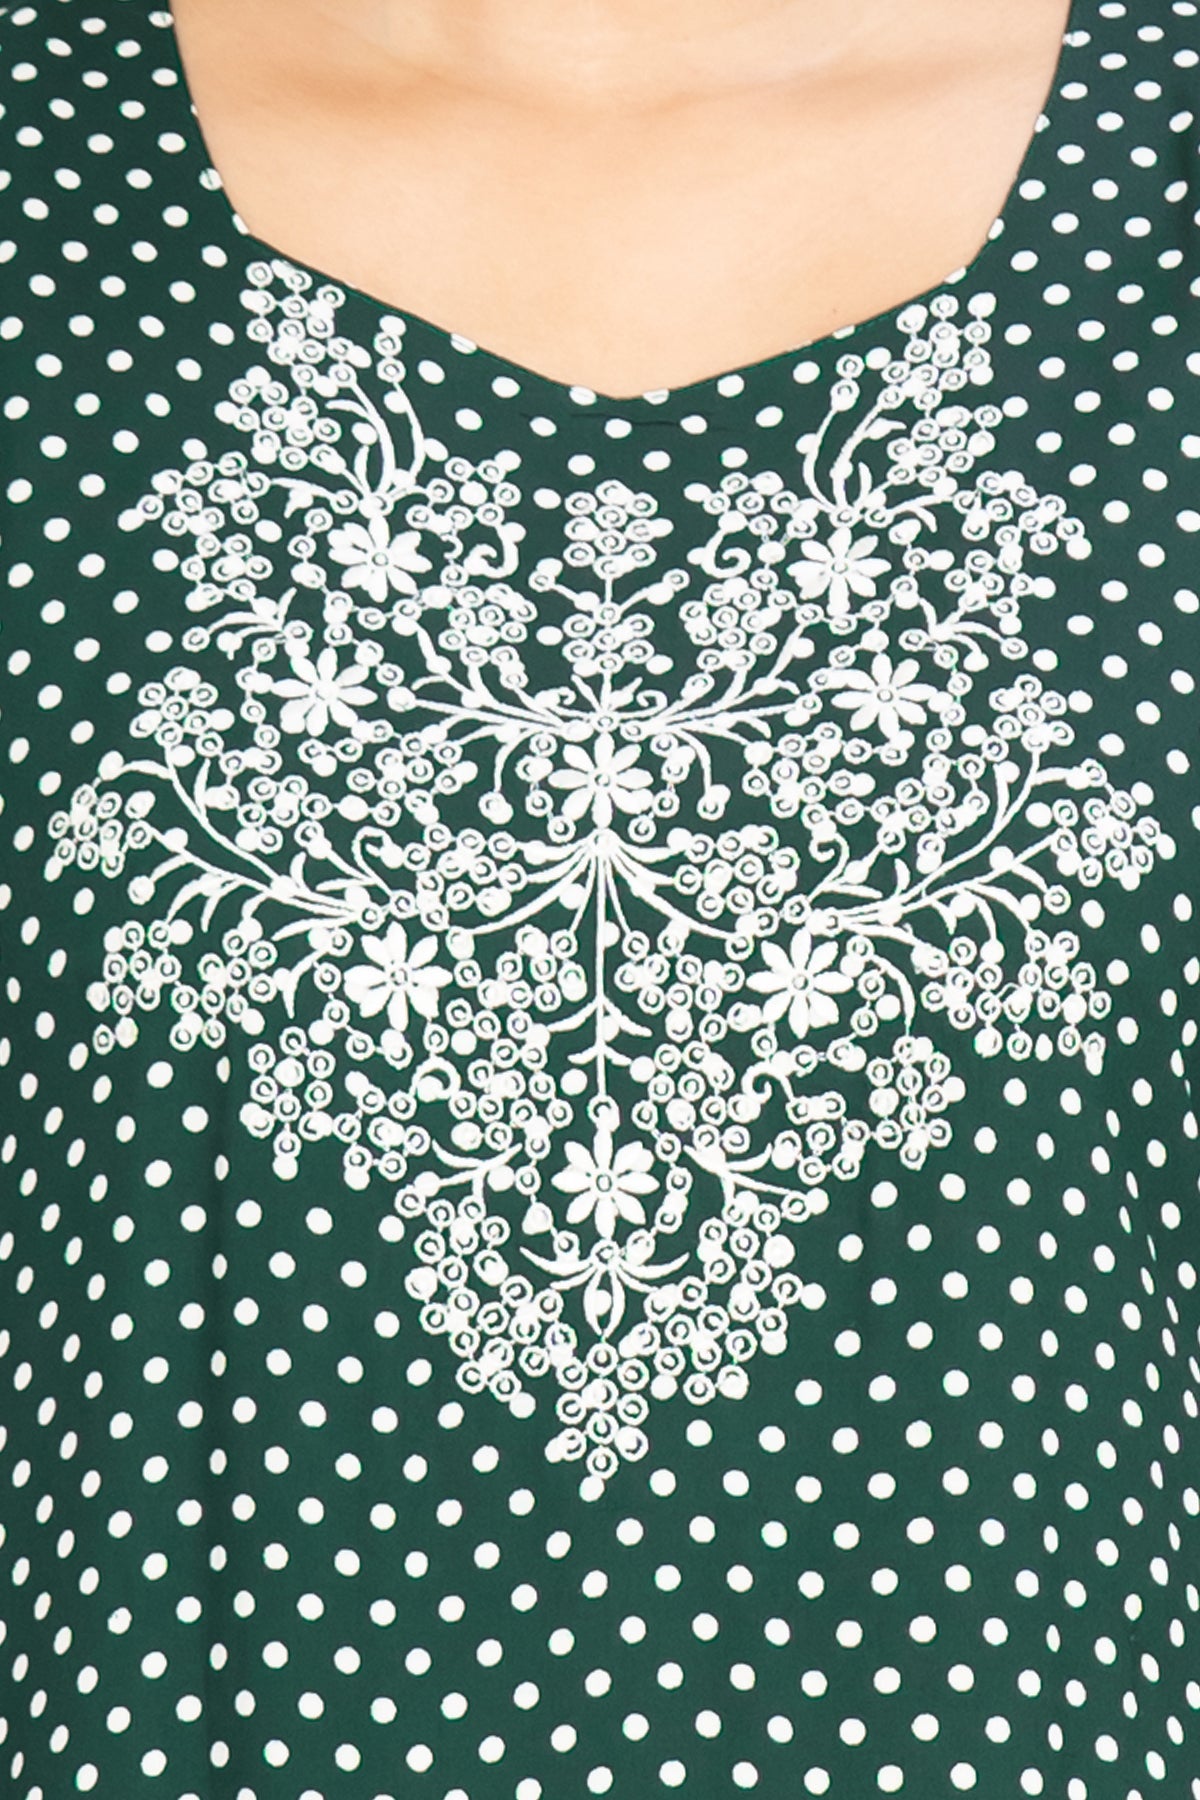 All Over Polka Dot Print With Contrast Floral Embroidered Yoke Nighty -Green